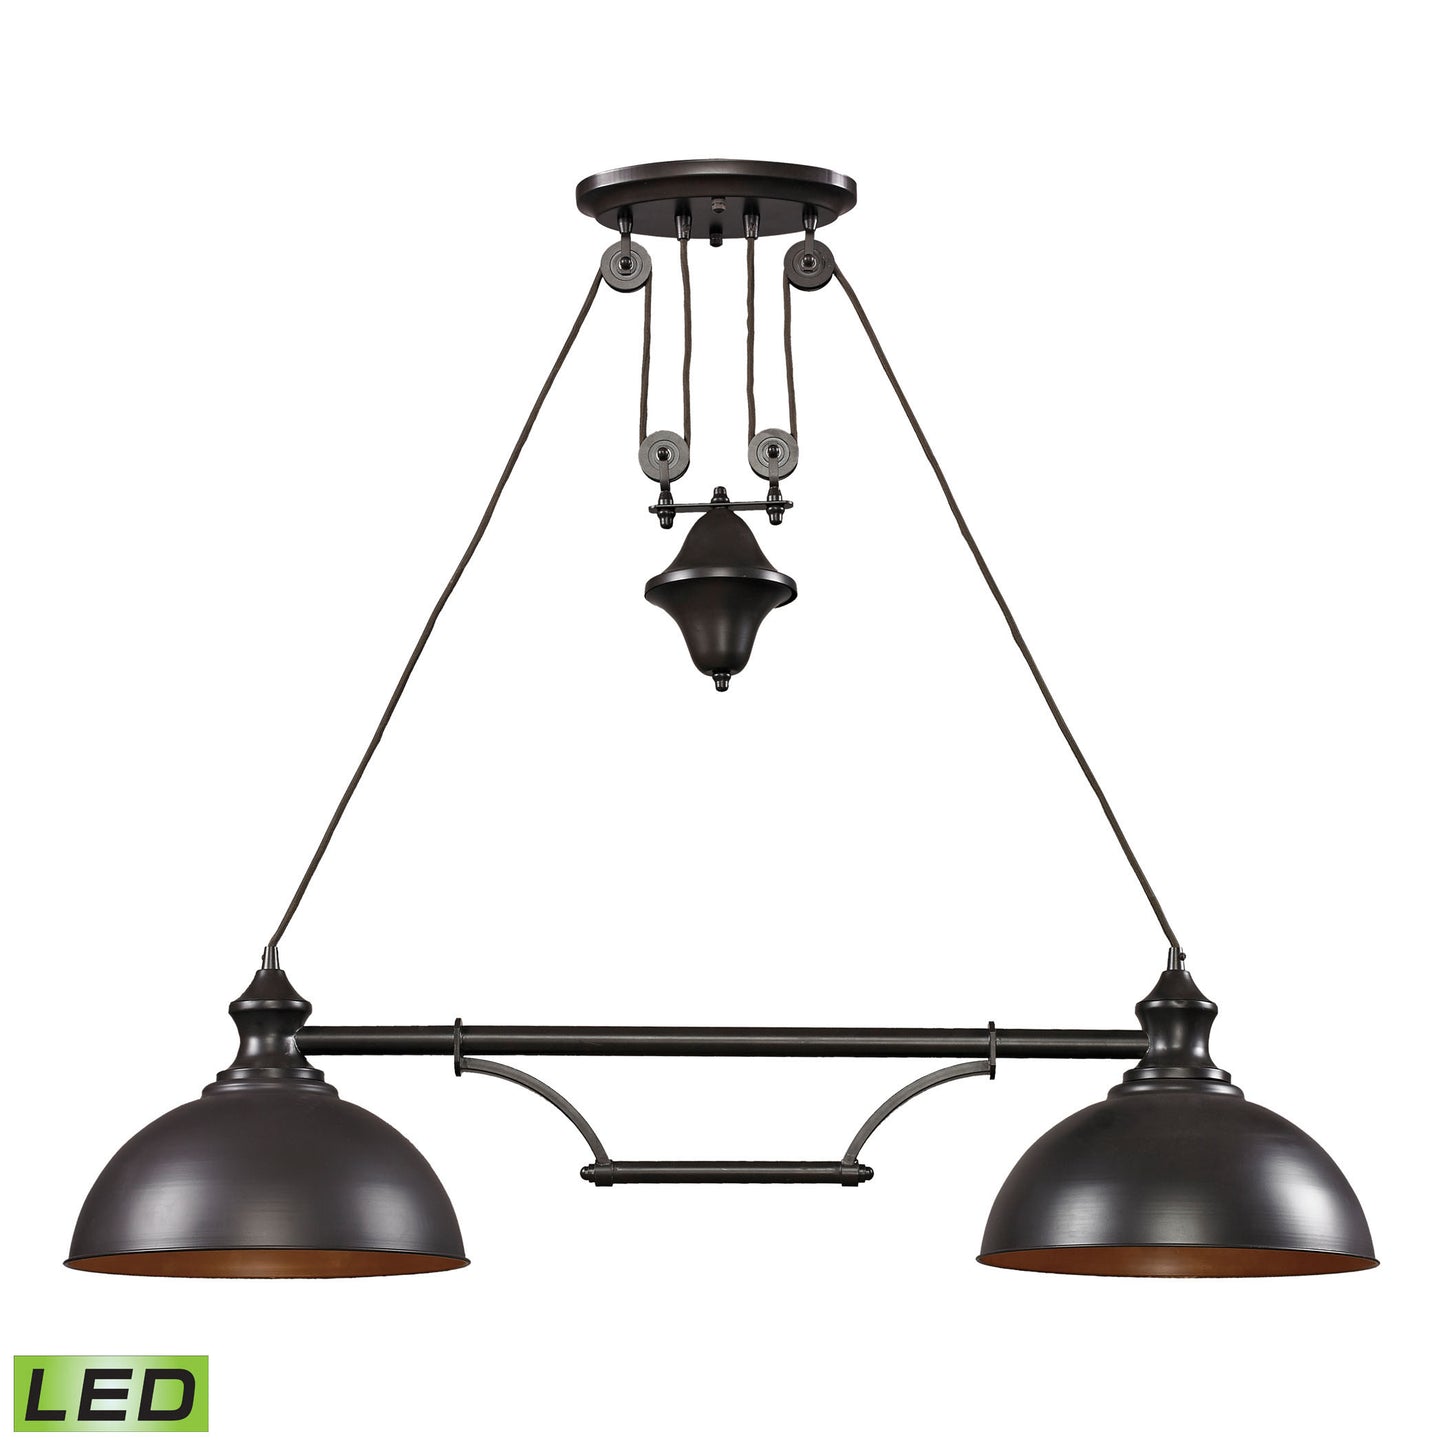 ELK Lighting 65150-2-LED - Farmhouse 13" Wide 2-Light Island Light in Oiled Bronze with Matching Sha